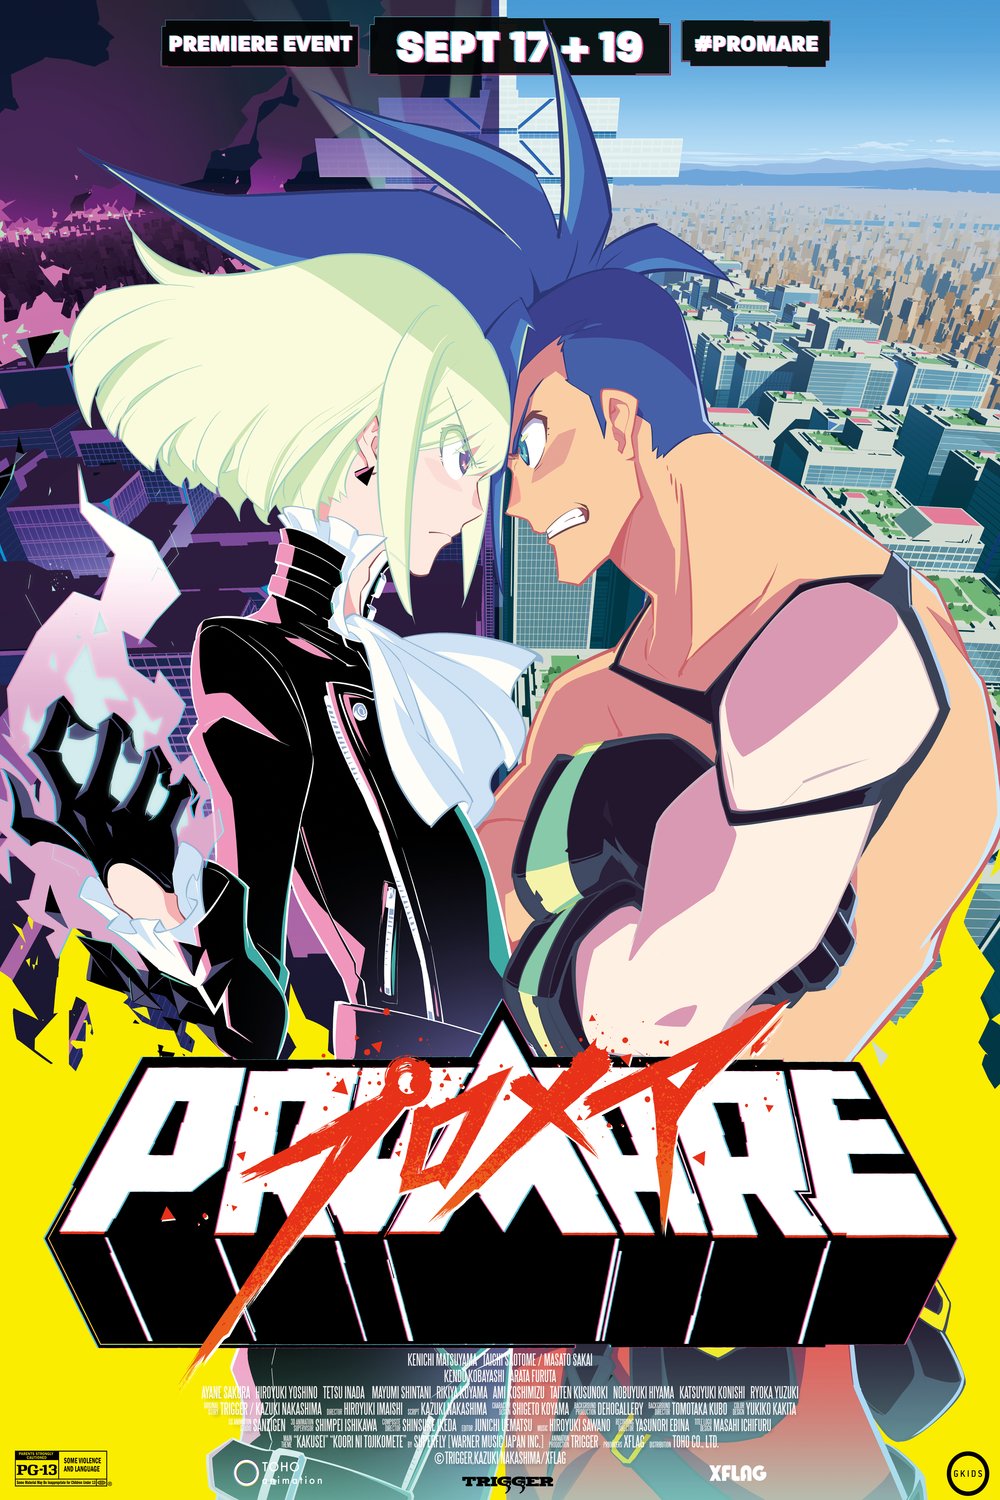 Japanese poster of the movie Promare